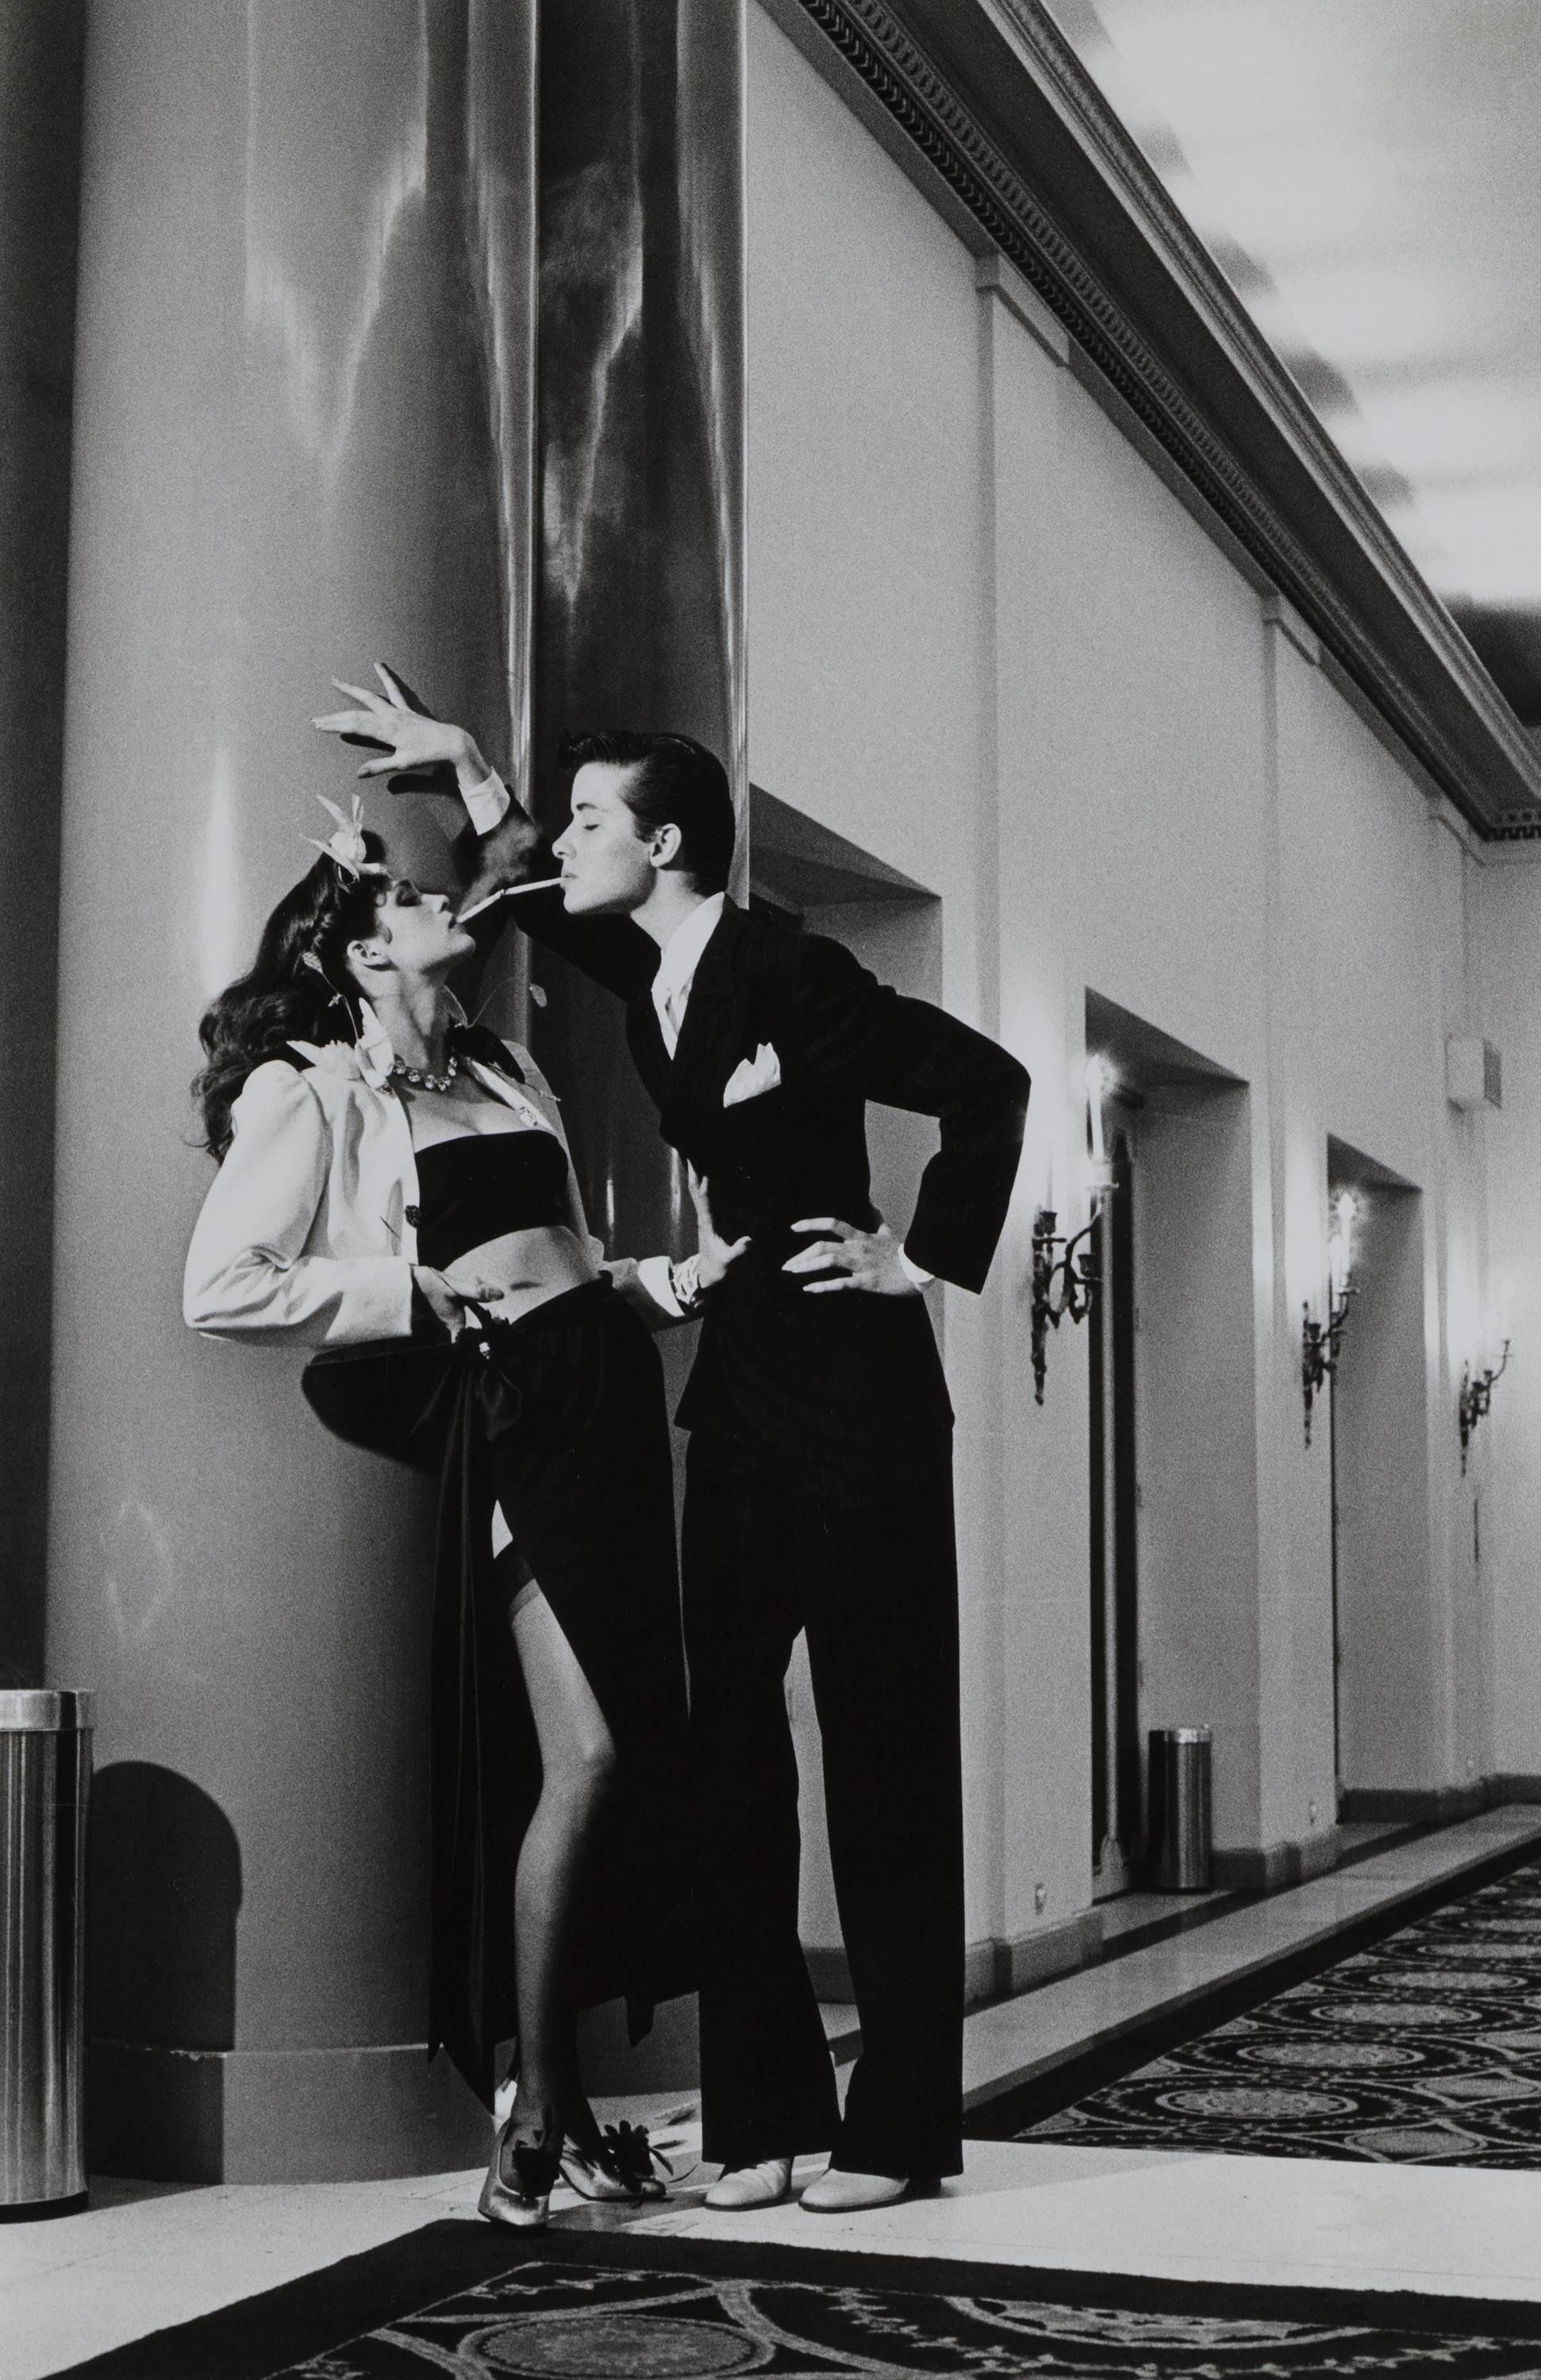 Woman into Man, Hotel George V, for French Vogue, 1979